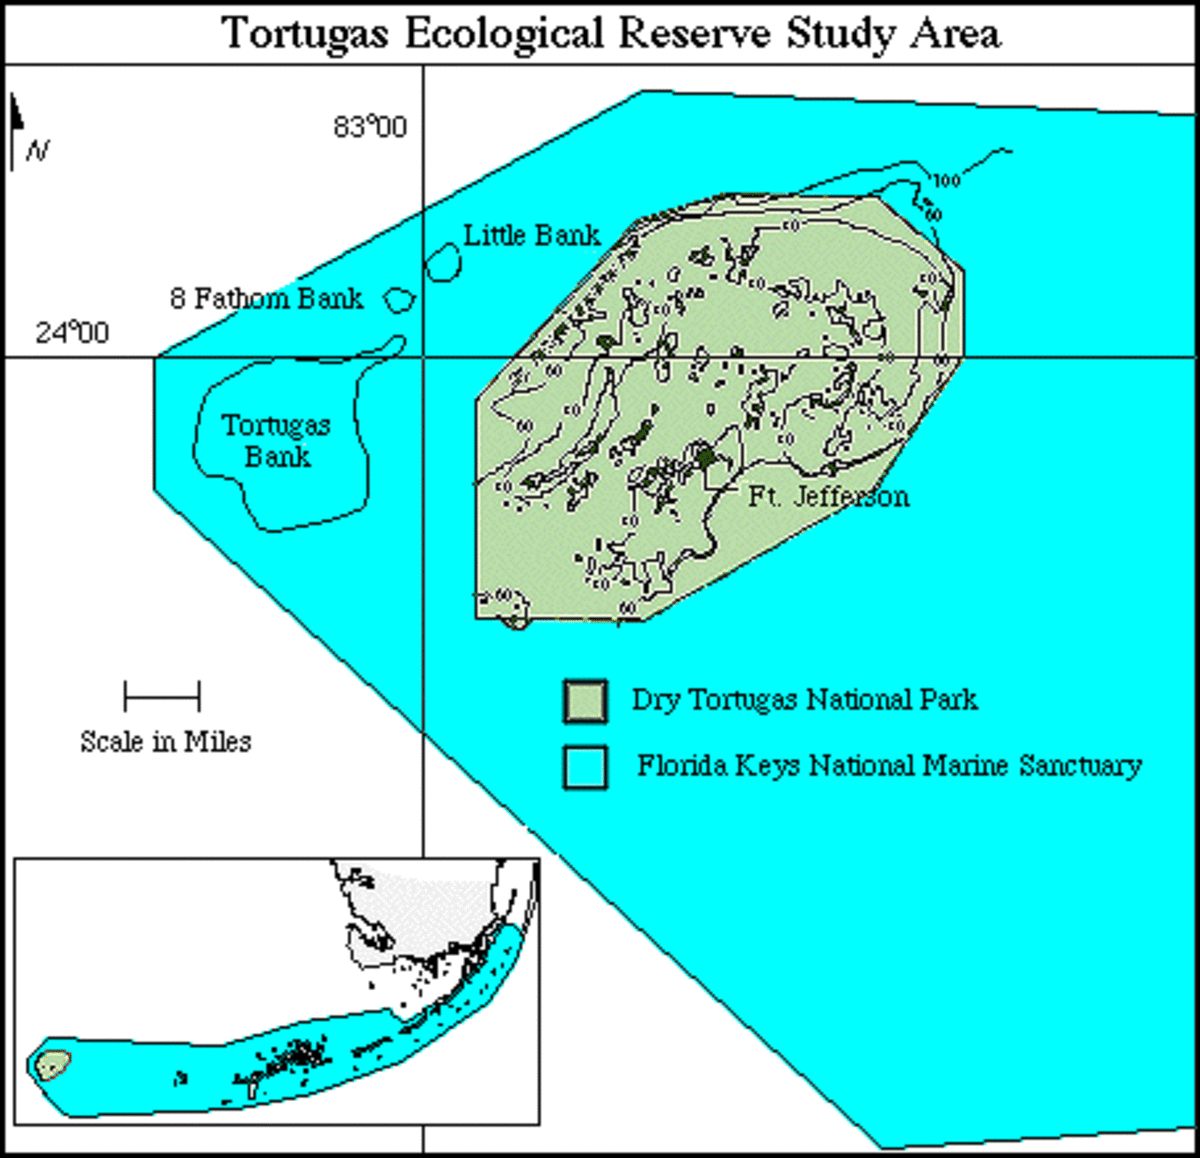 Tortugas Bank is furthest west and is totally submerged in the Gulf of Mexico.